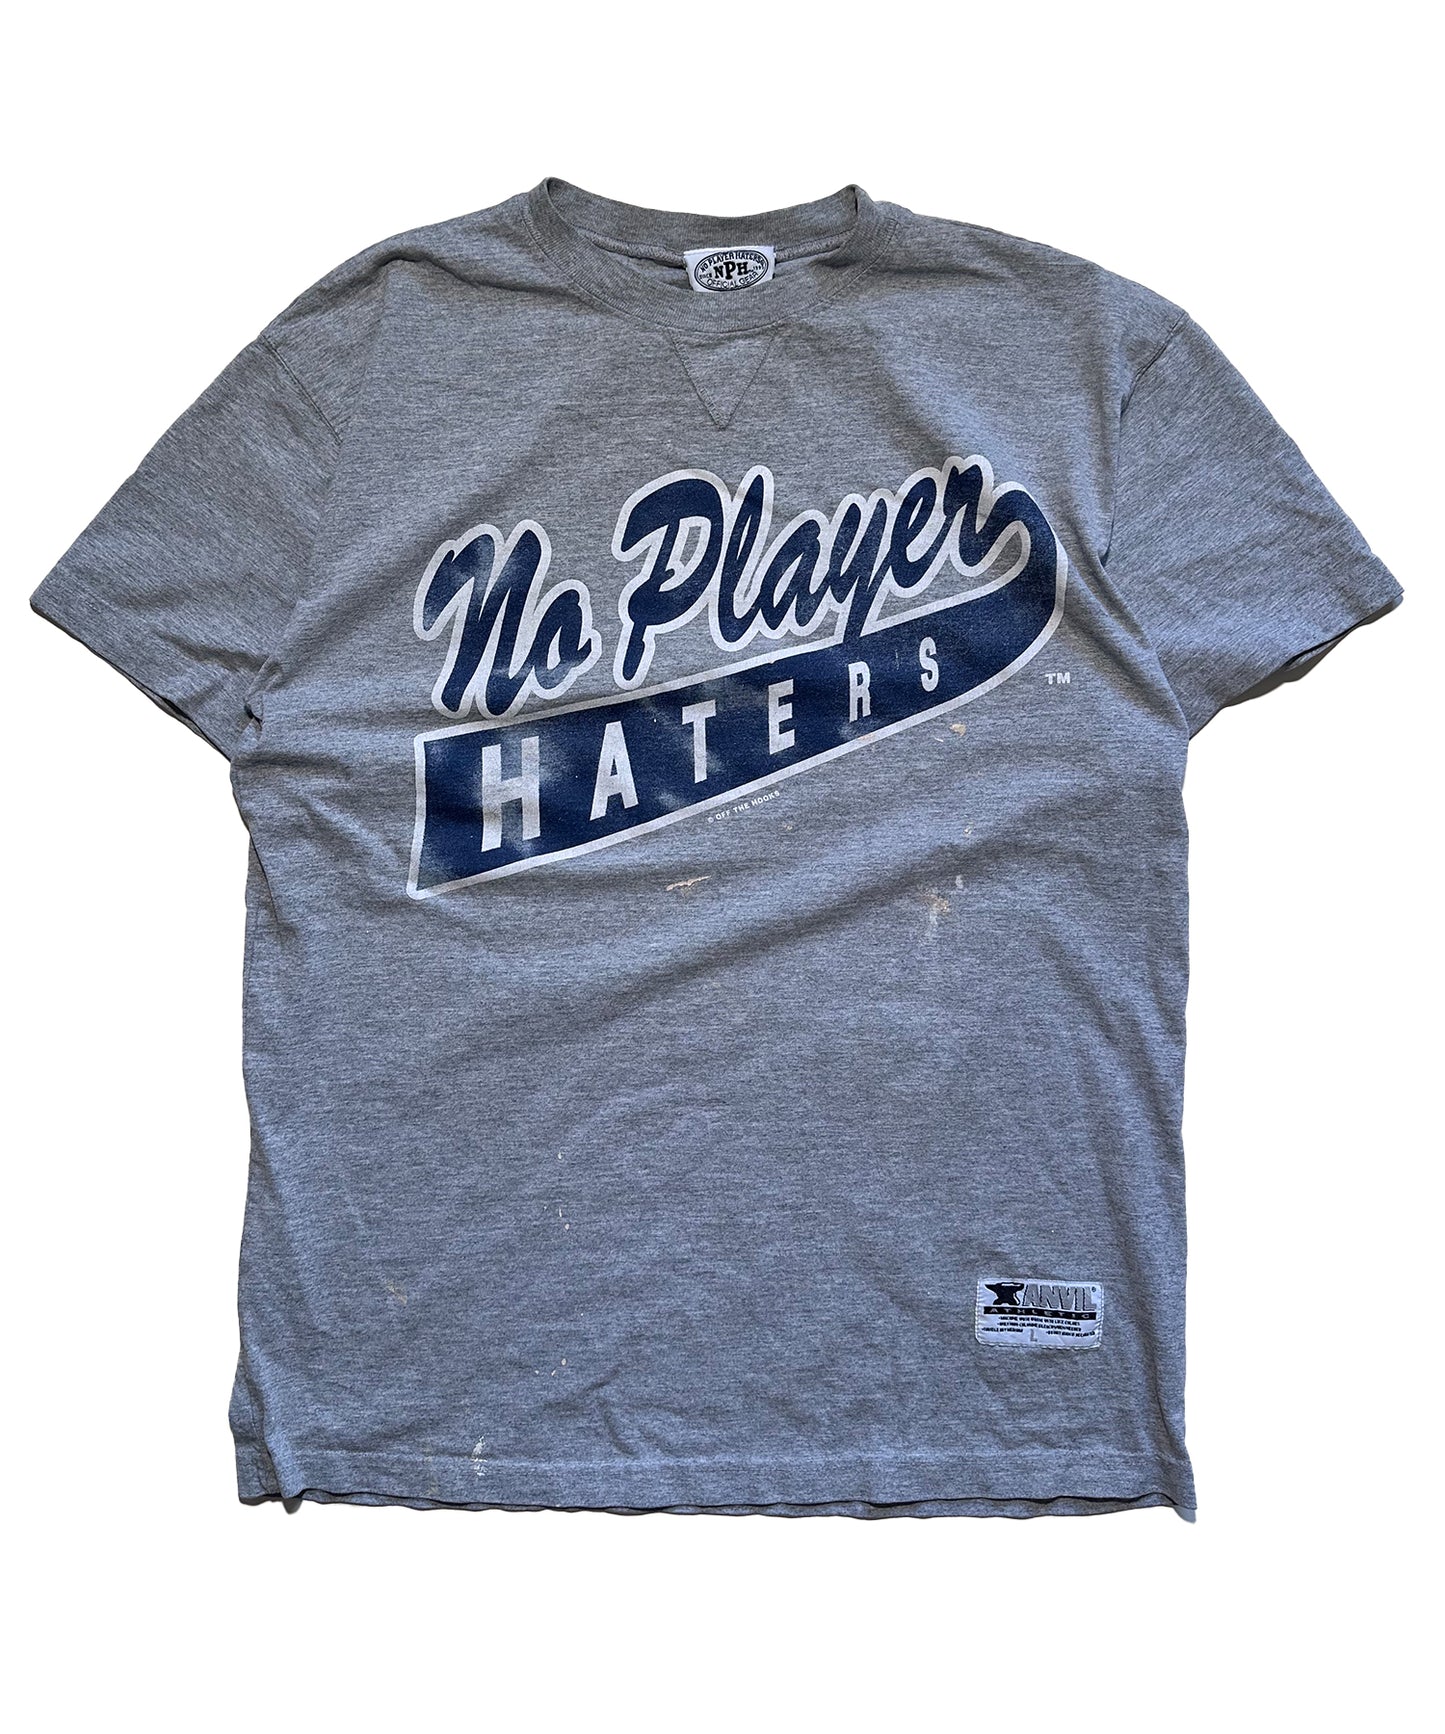 Vintage "No Player Haters" Tee (Large) see